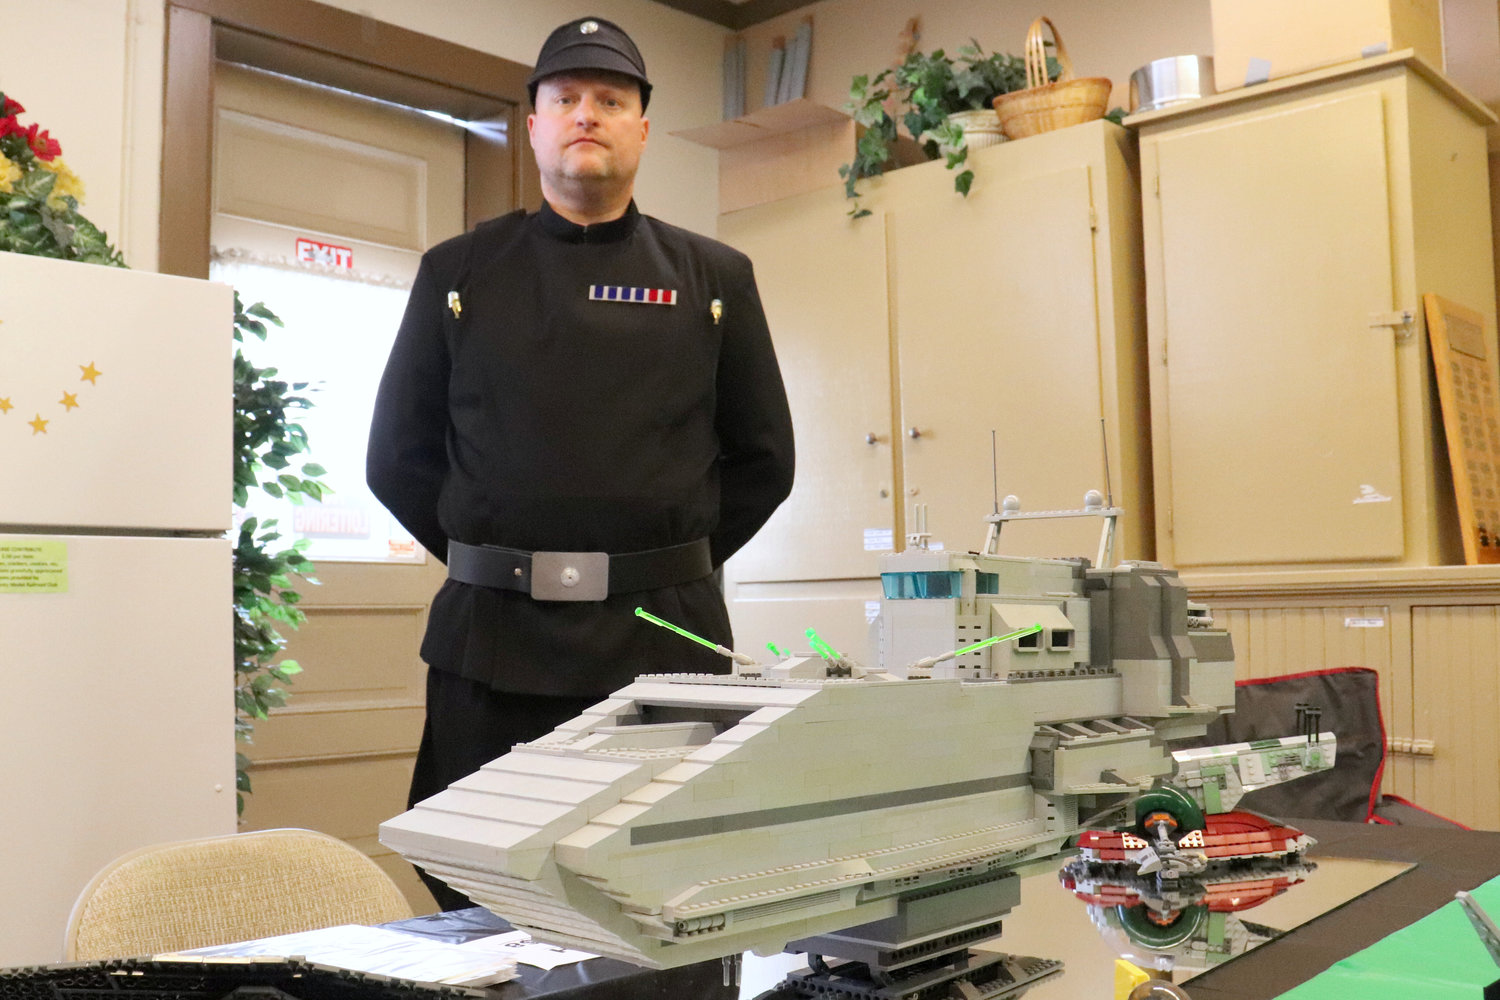 Steve Kross, dressed as a ANH staff officer, stands behind his LEGO creation in the Lewis County Historical Museum during the Chehalis Flying Saucer Party on Saturday.